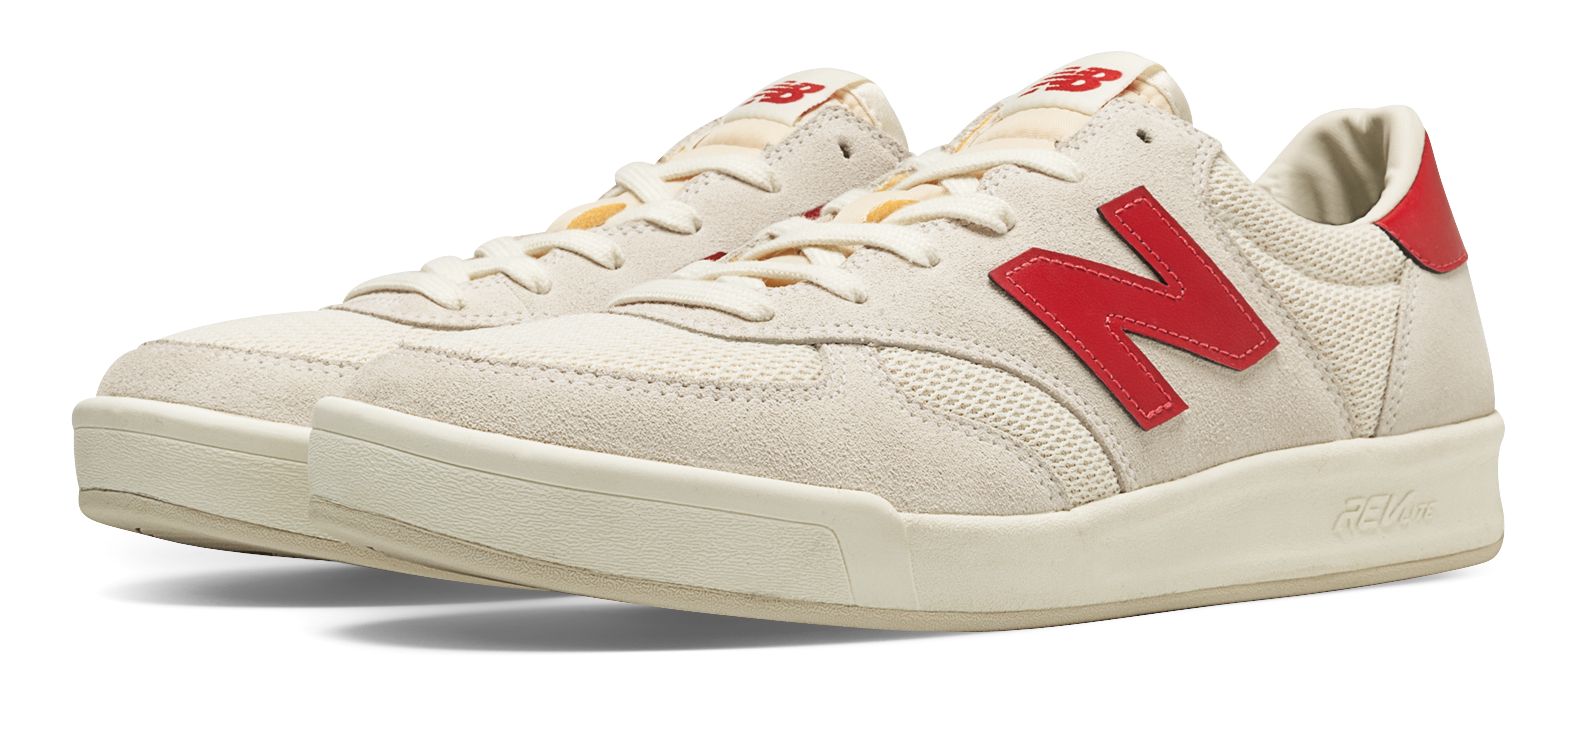 new balance 300 femme rouge Cheaper Than Retail Price> Buy ...